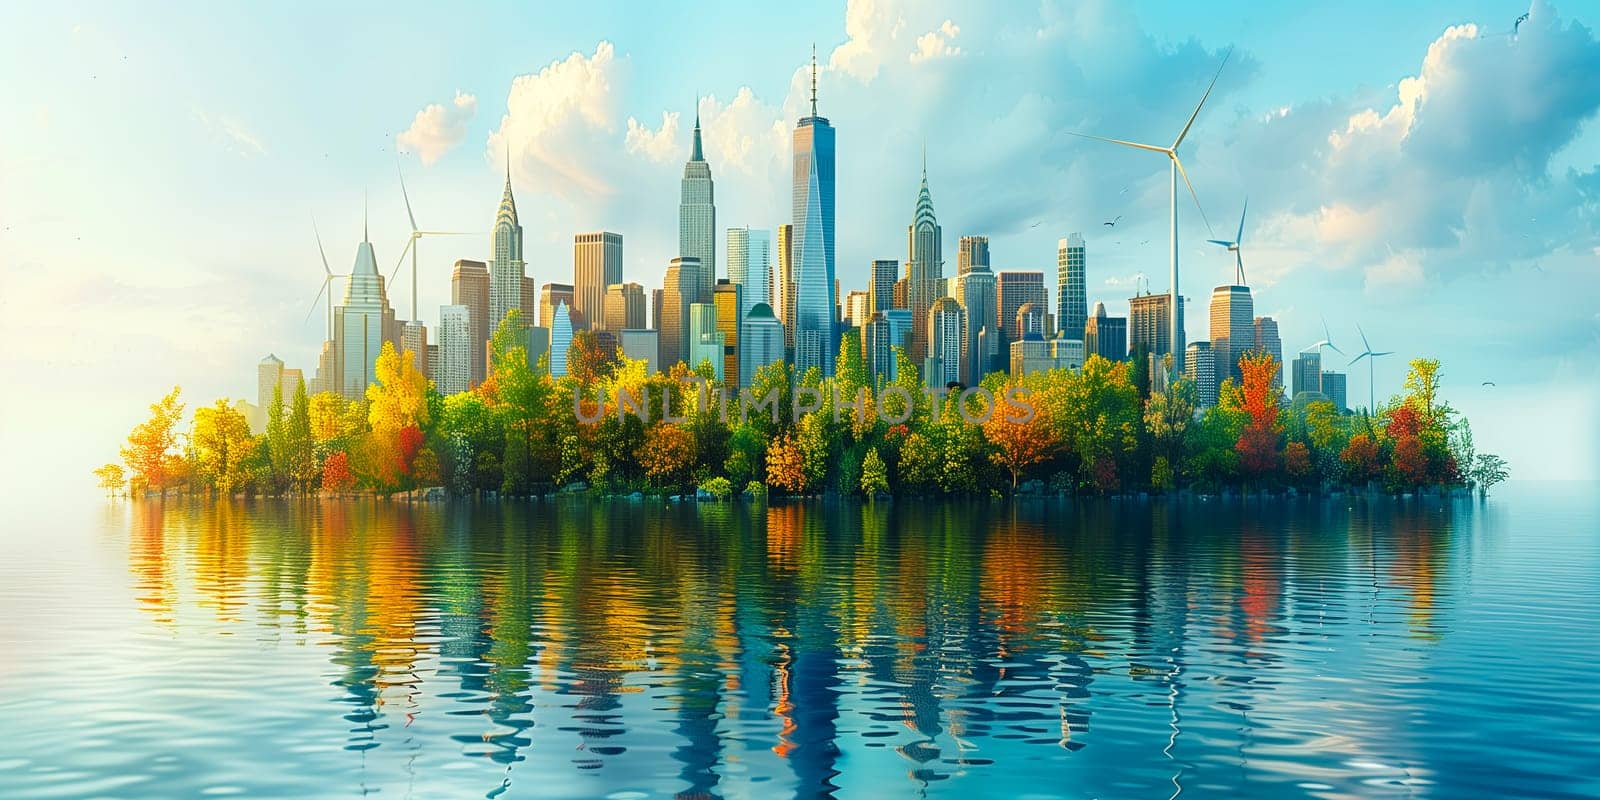 Big city with skyscrapers and wind turbines in background. Concept of sustainable energy solution by sarymsakov